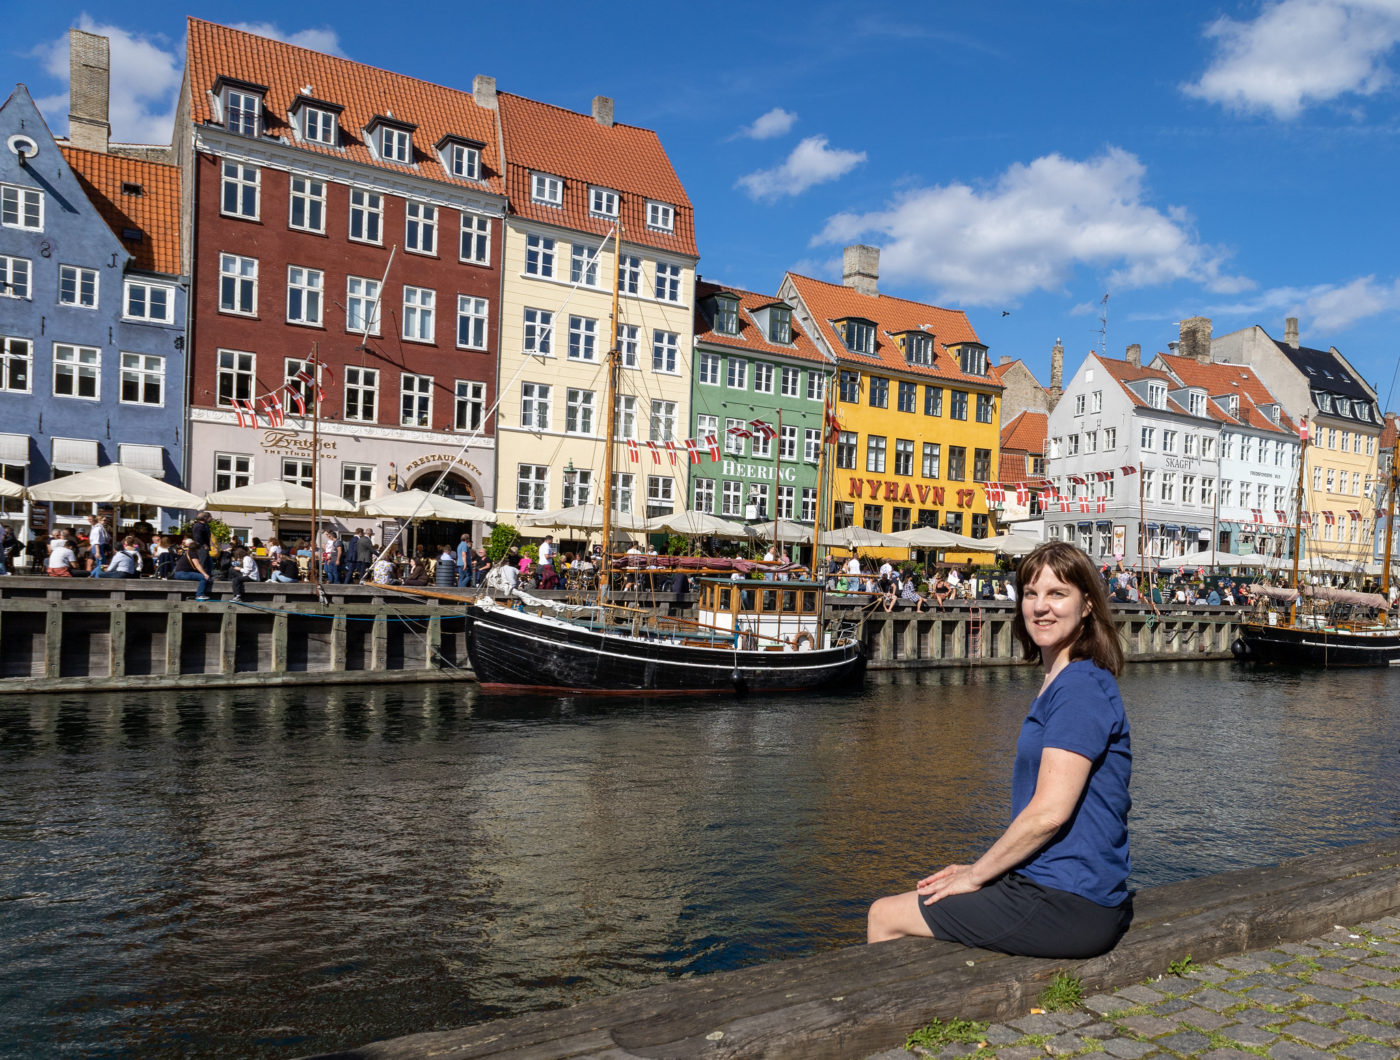 The Ultimate Travel Guide to Picturesque Copenhagen with 20 Top Attractions